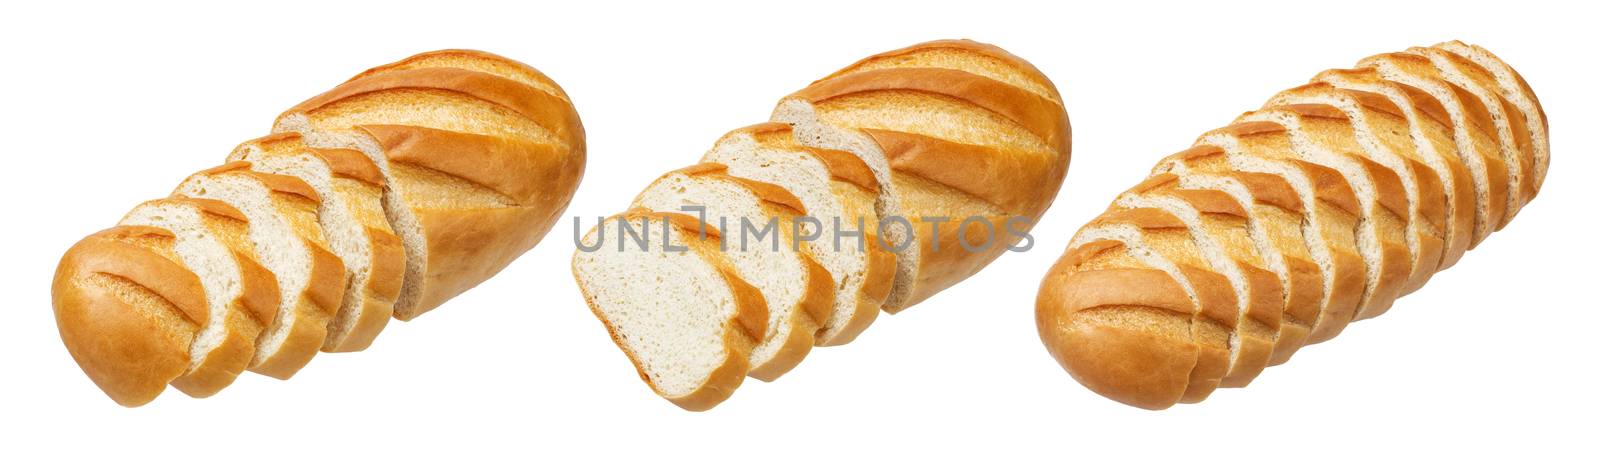 Long loaf. Sliced white bread isolated on white background by xamtiw